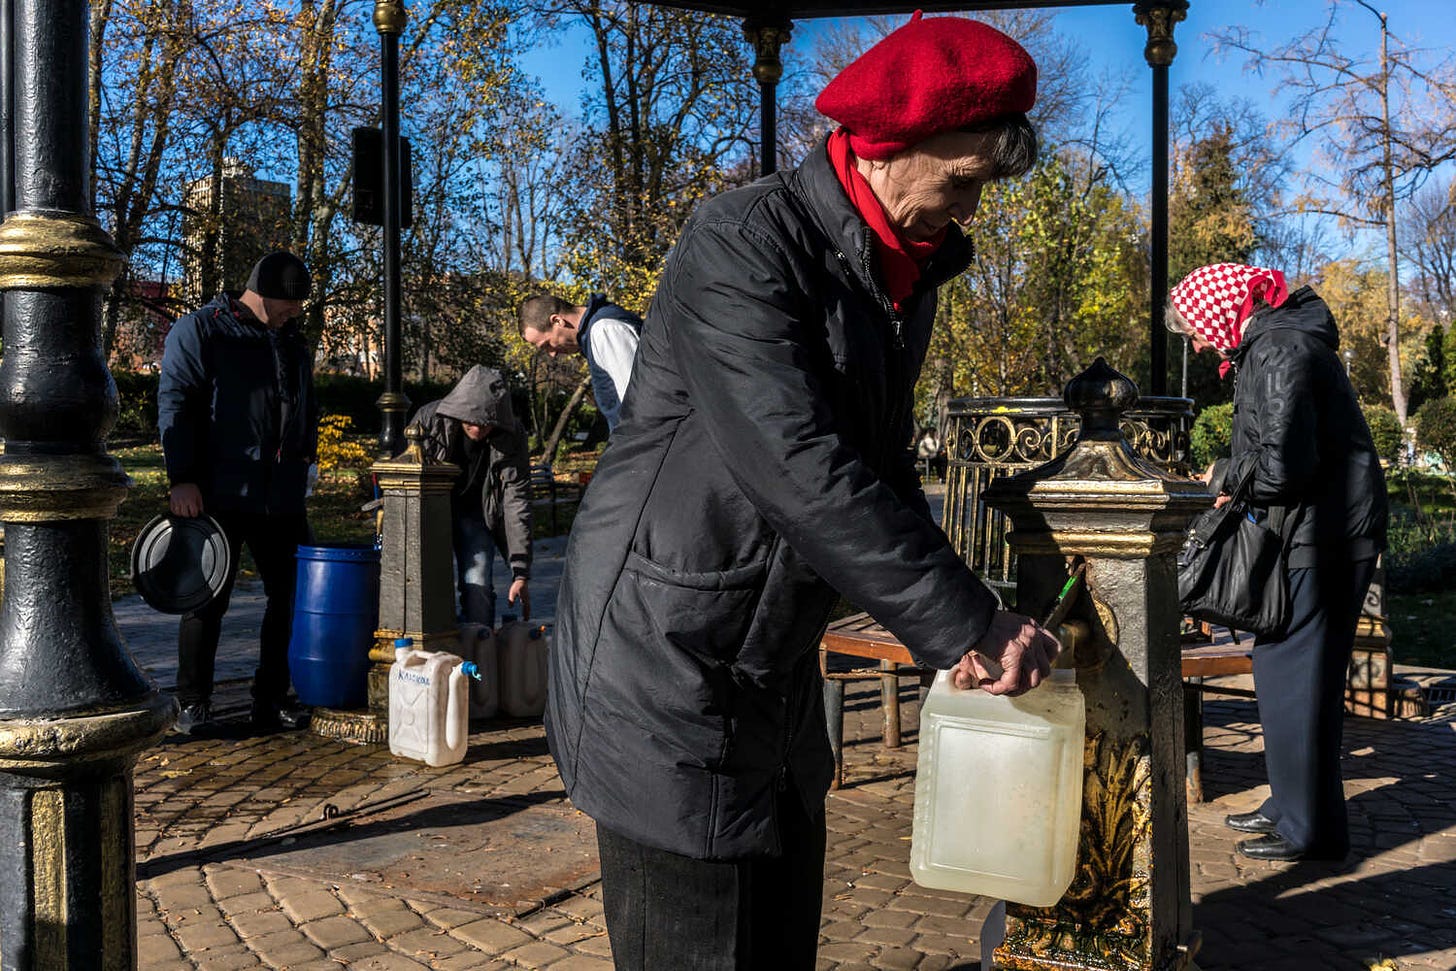 Collecting drinking water from public taps in Shevchenko Park on Monday in Kyiv.